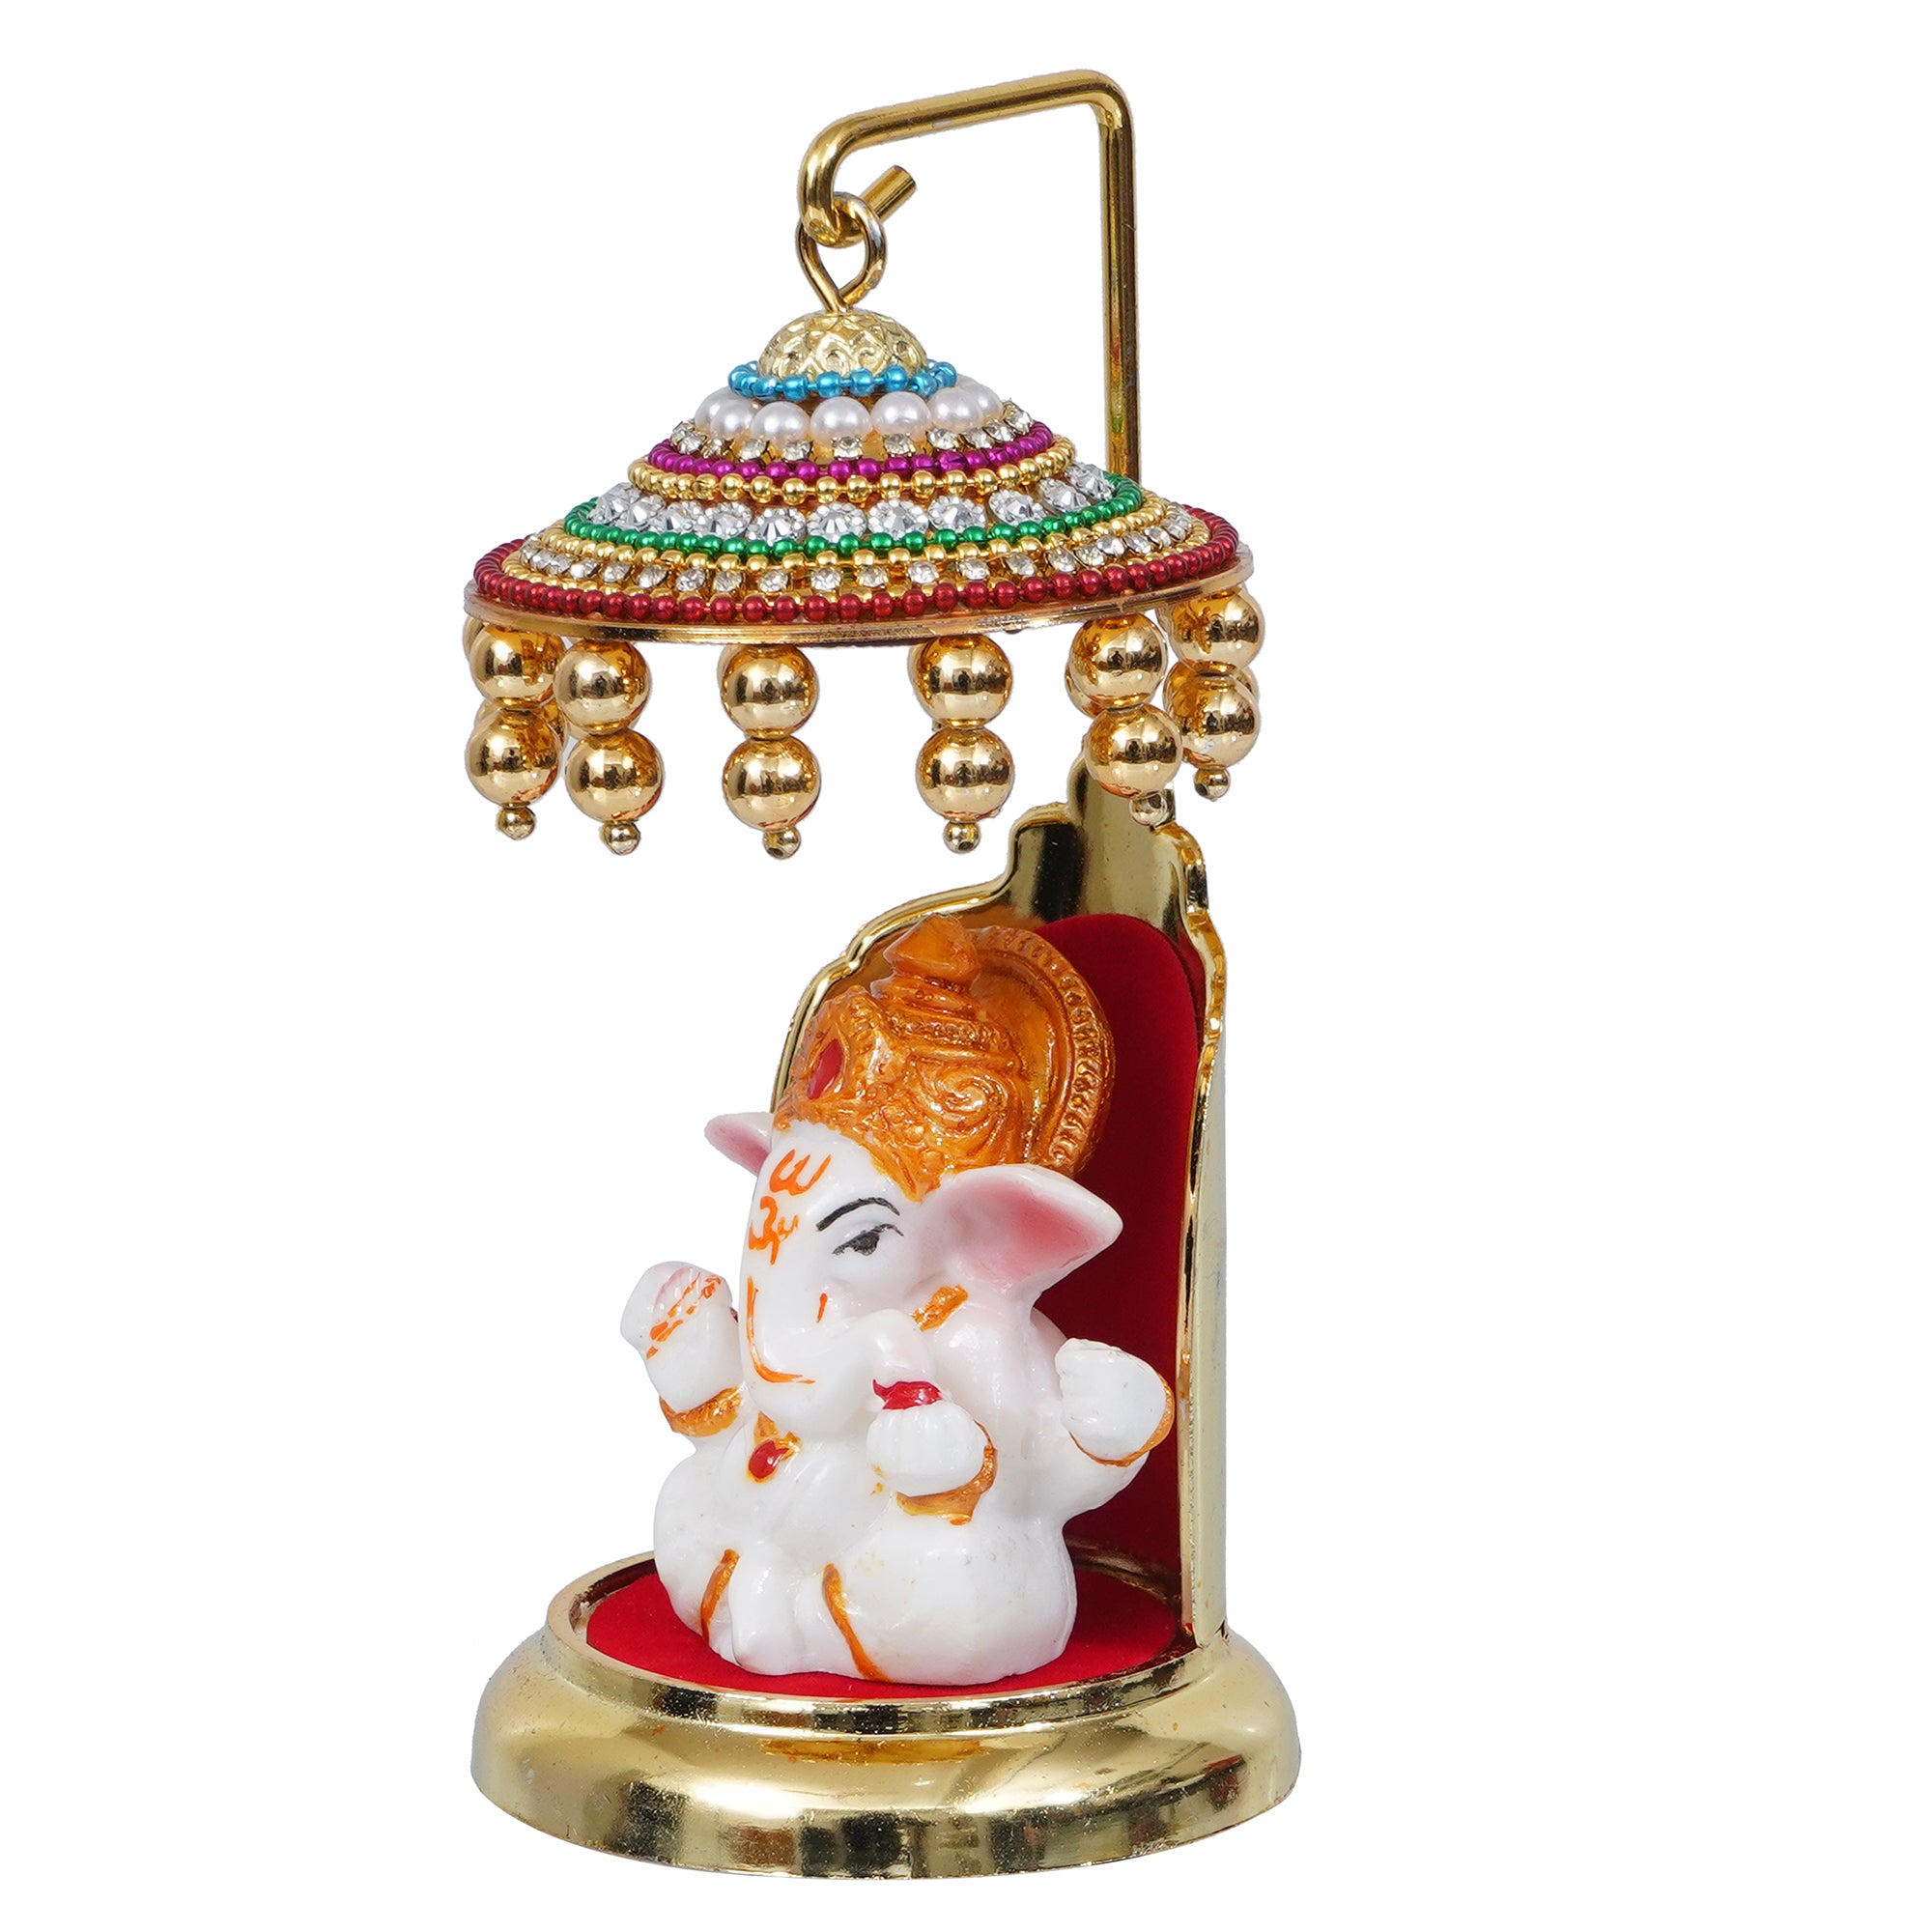 Decorative Lord Ganesha Idol with Designer Chatri for Car Dashboard, Home Temple and Office Desks 5